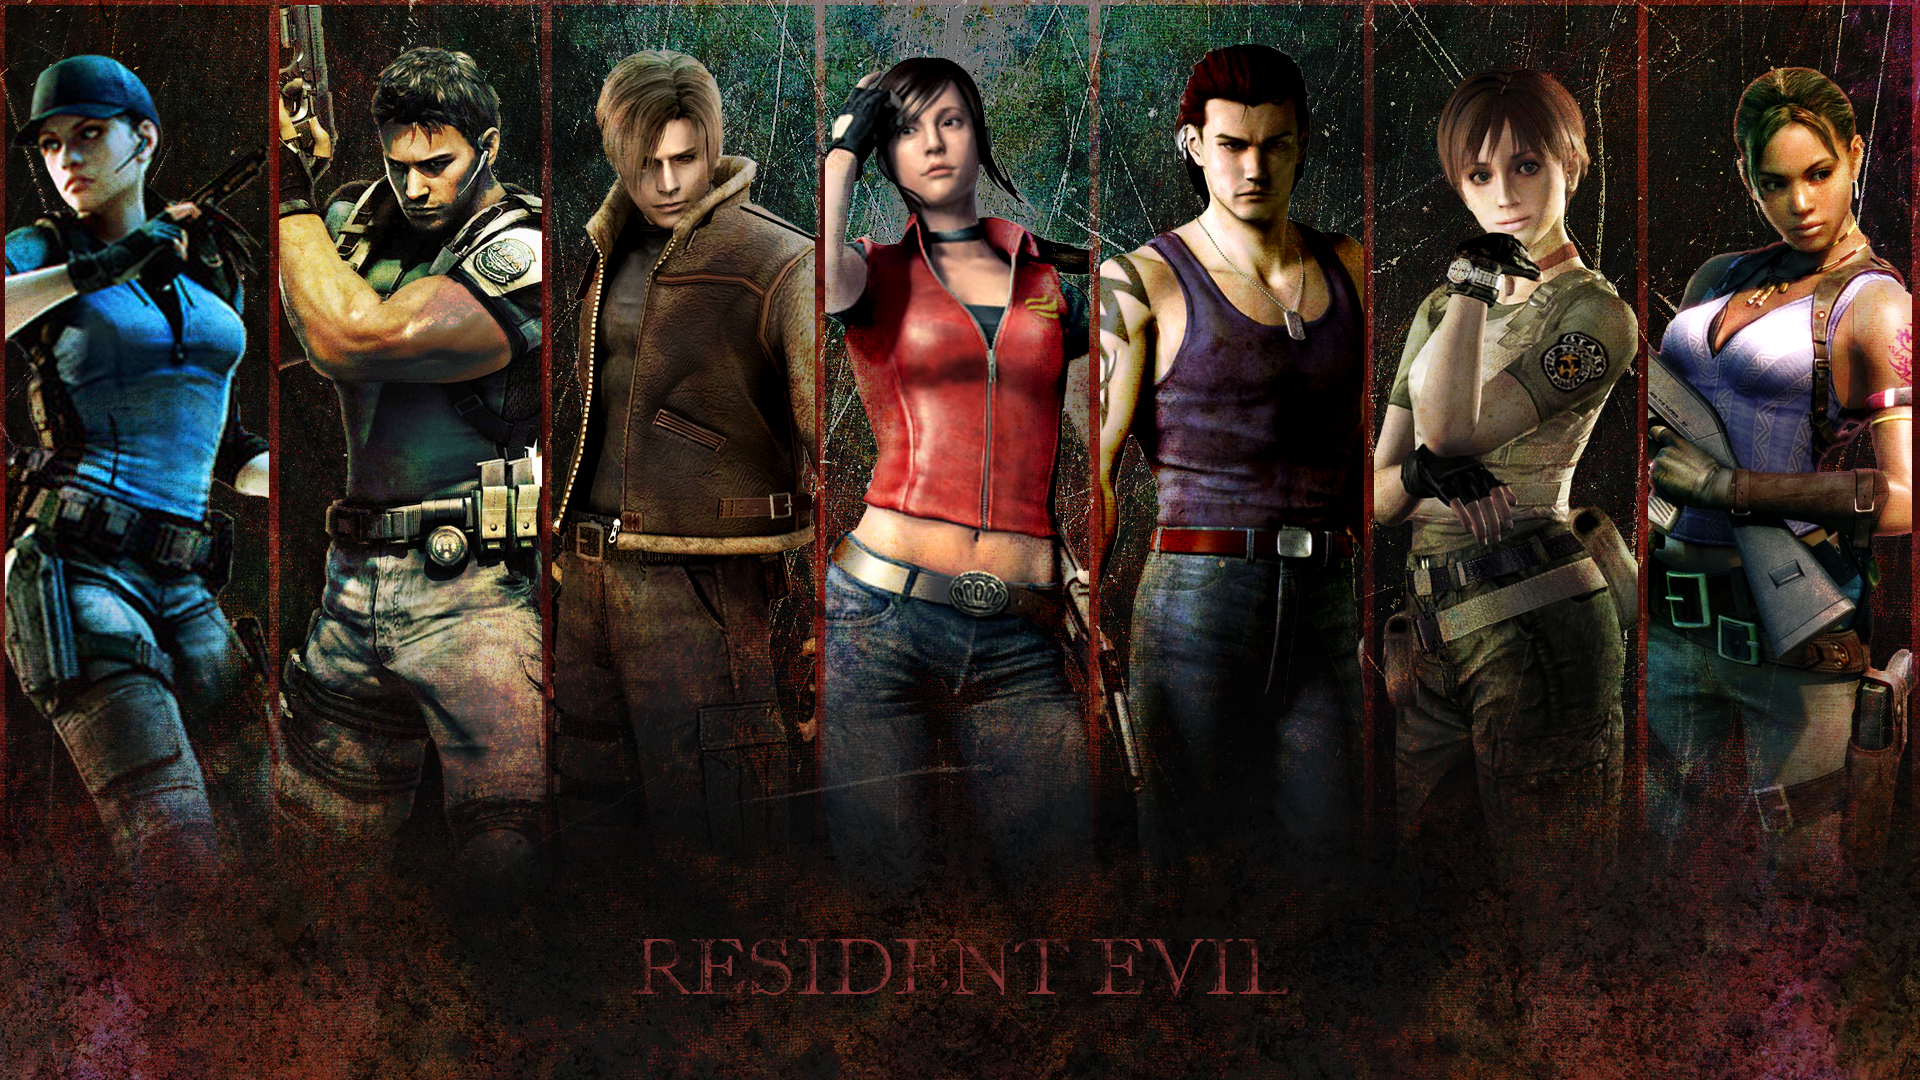 Pure Opinion: The Bright Future Of Resident Evil: What Makes It So and What's Next?